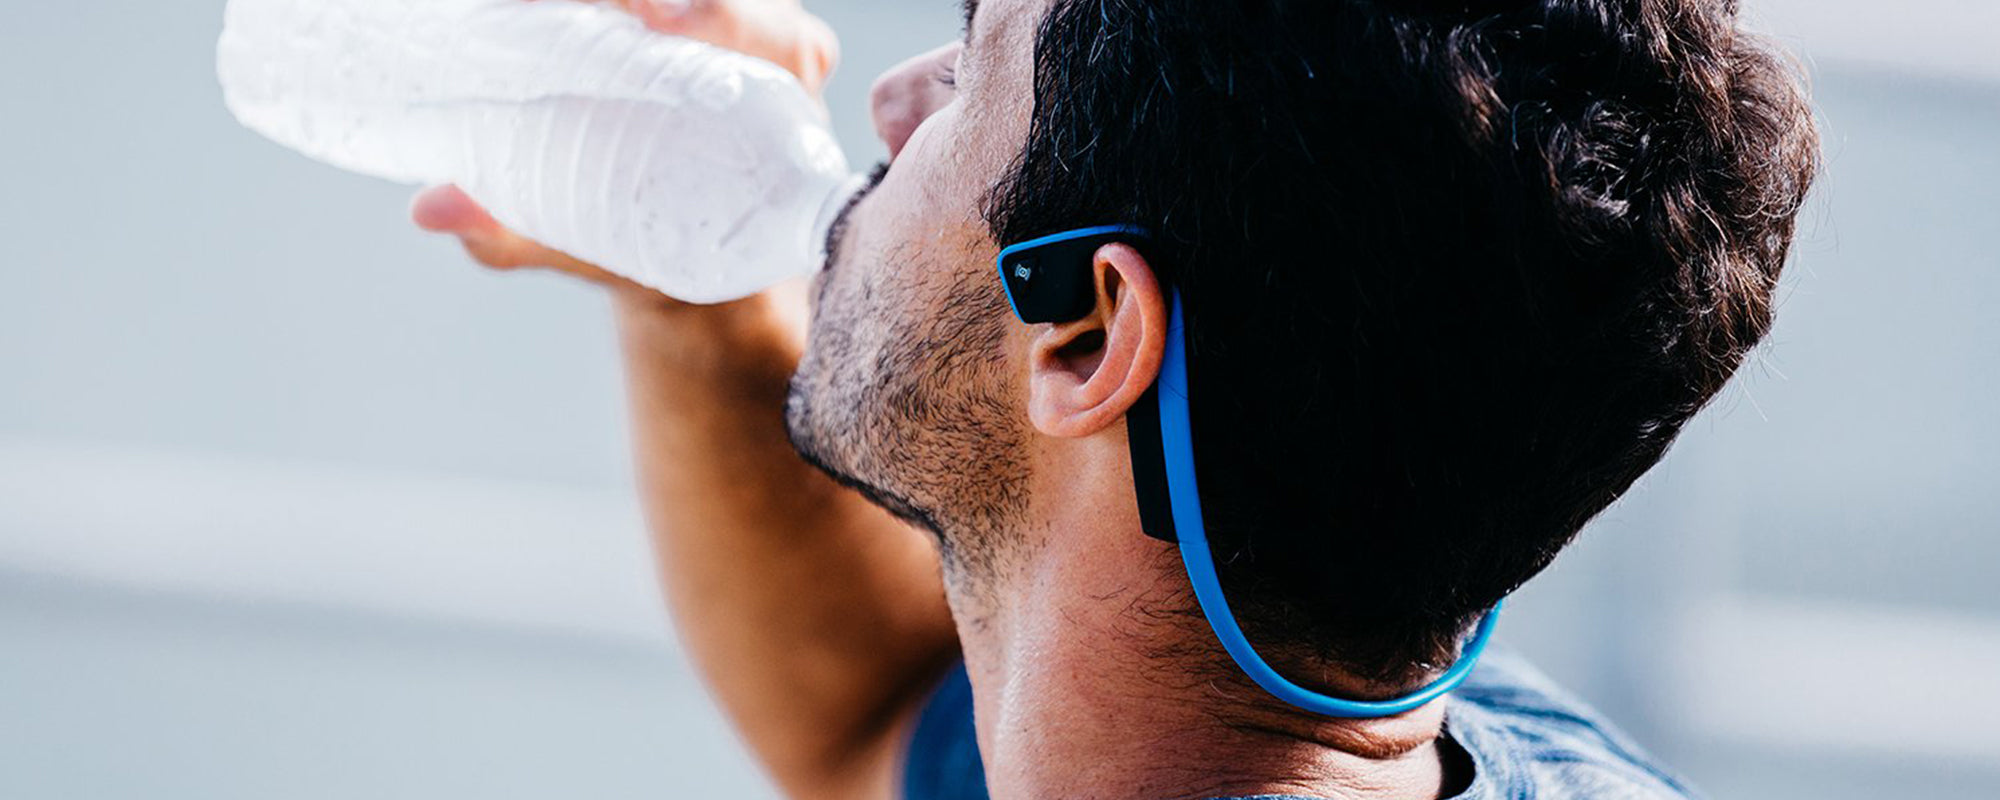 4 Tips For Staying Hydrated This Summer